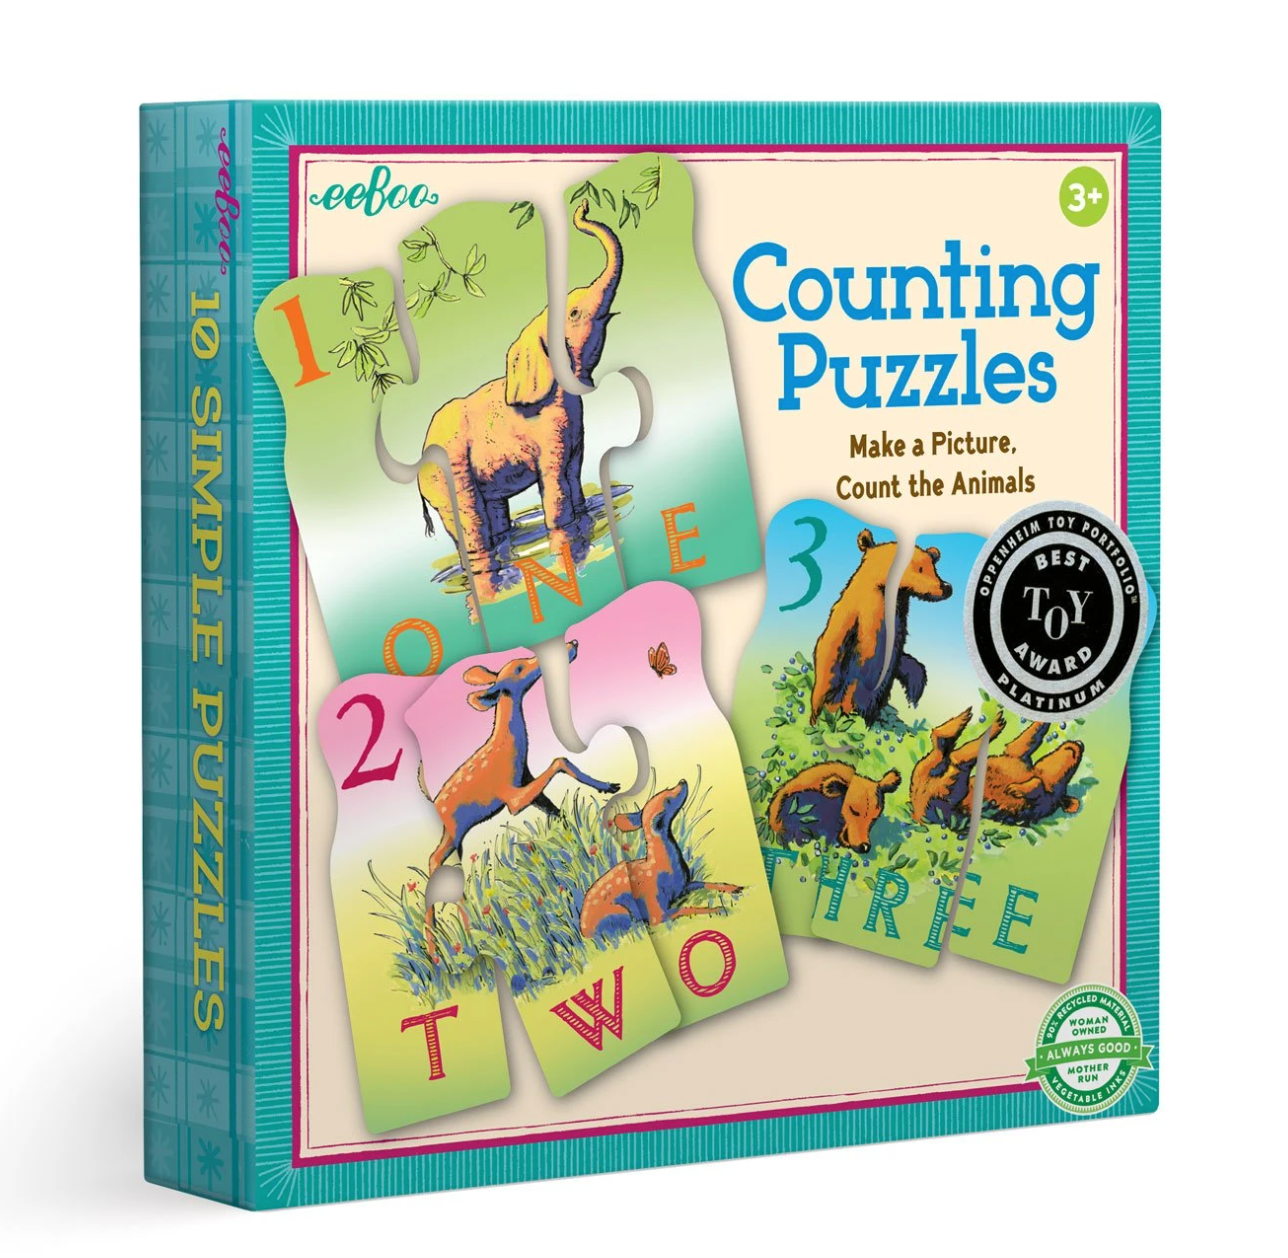 Counting Puzzles